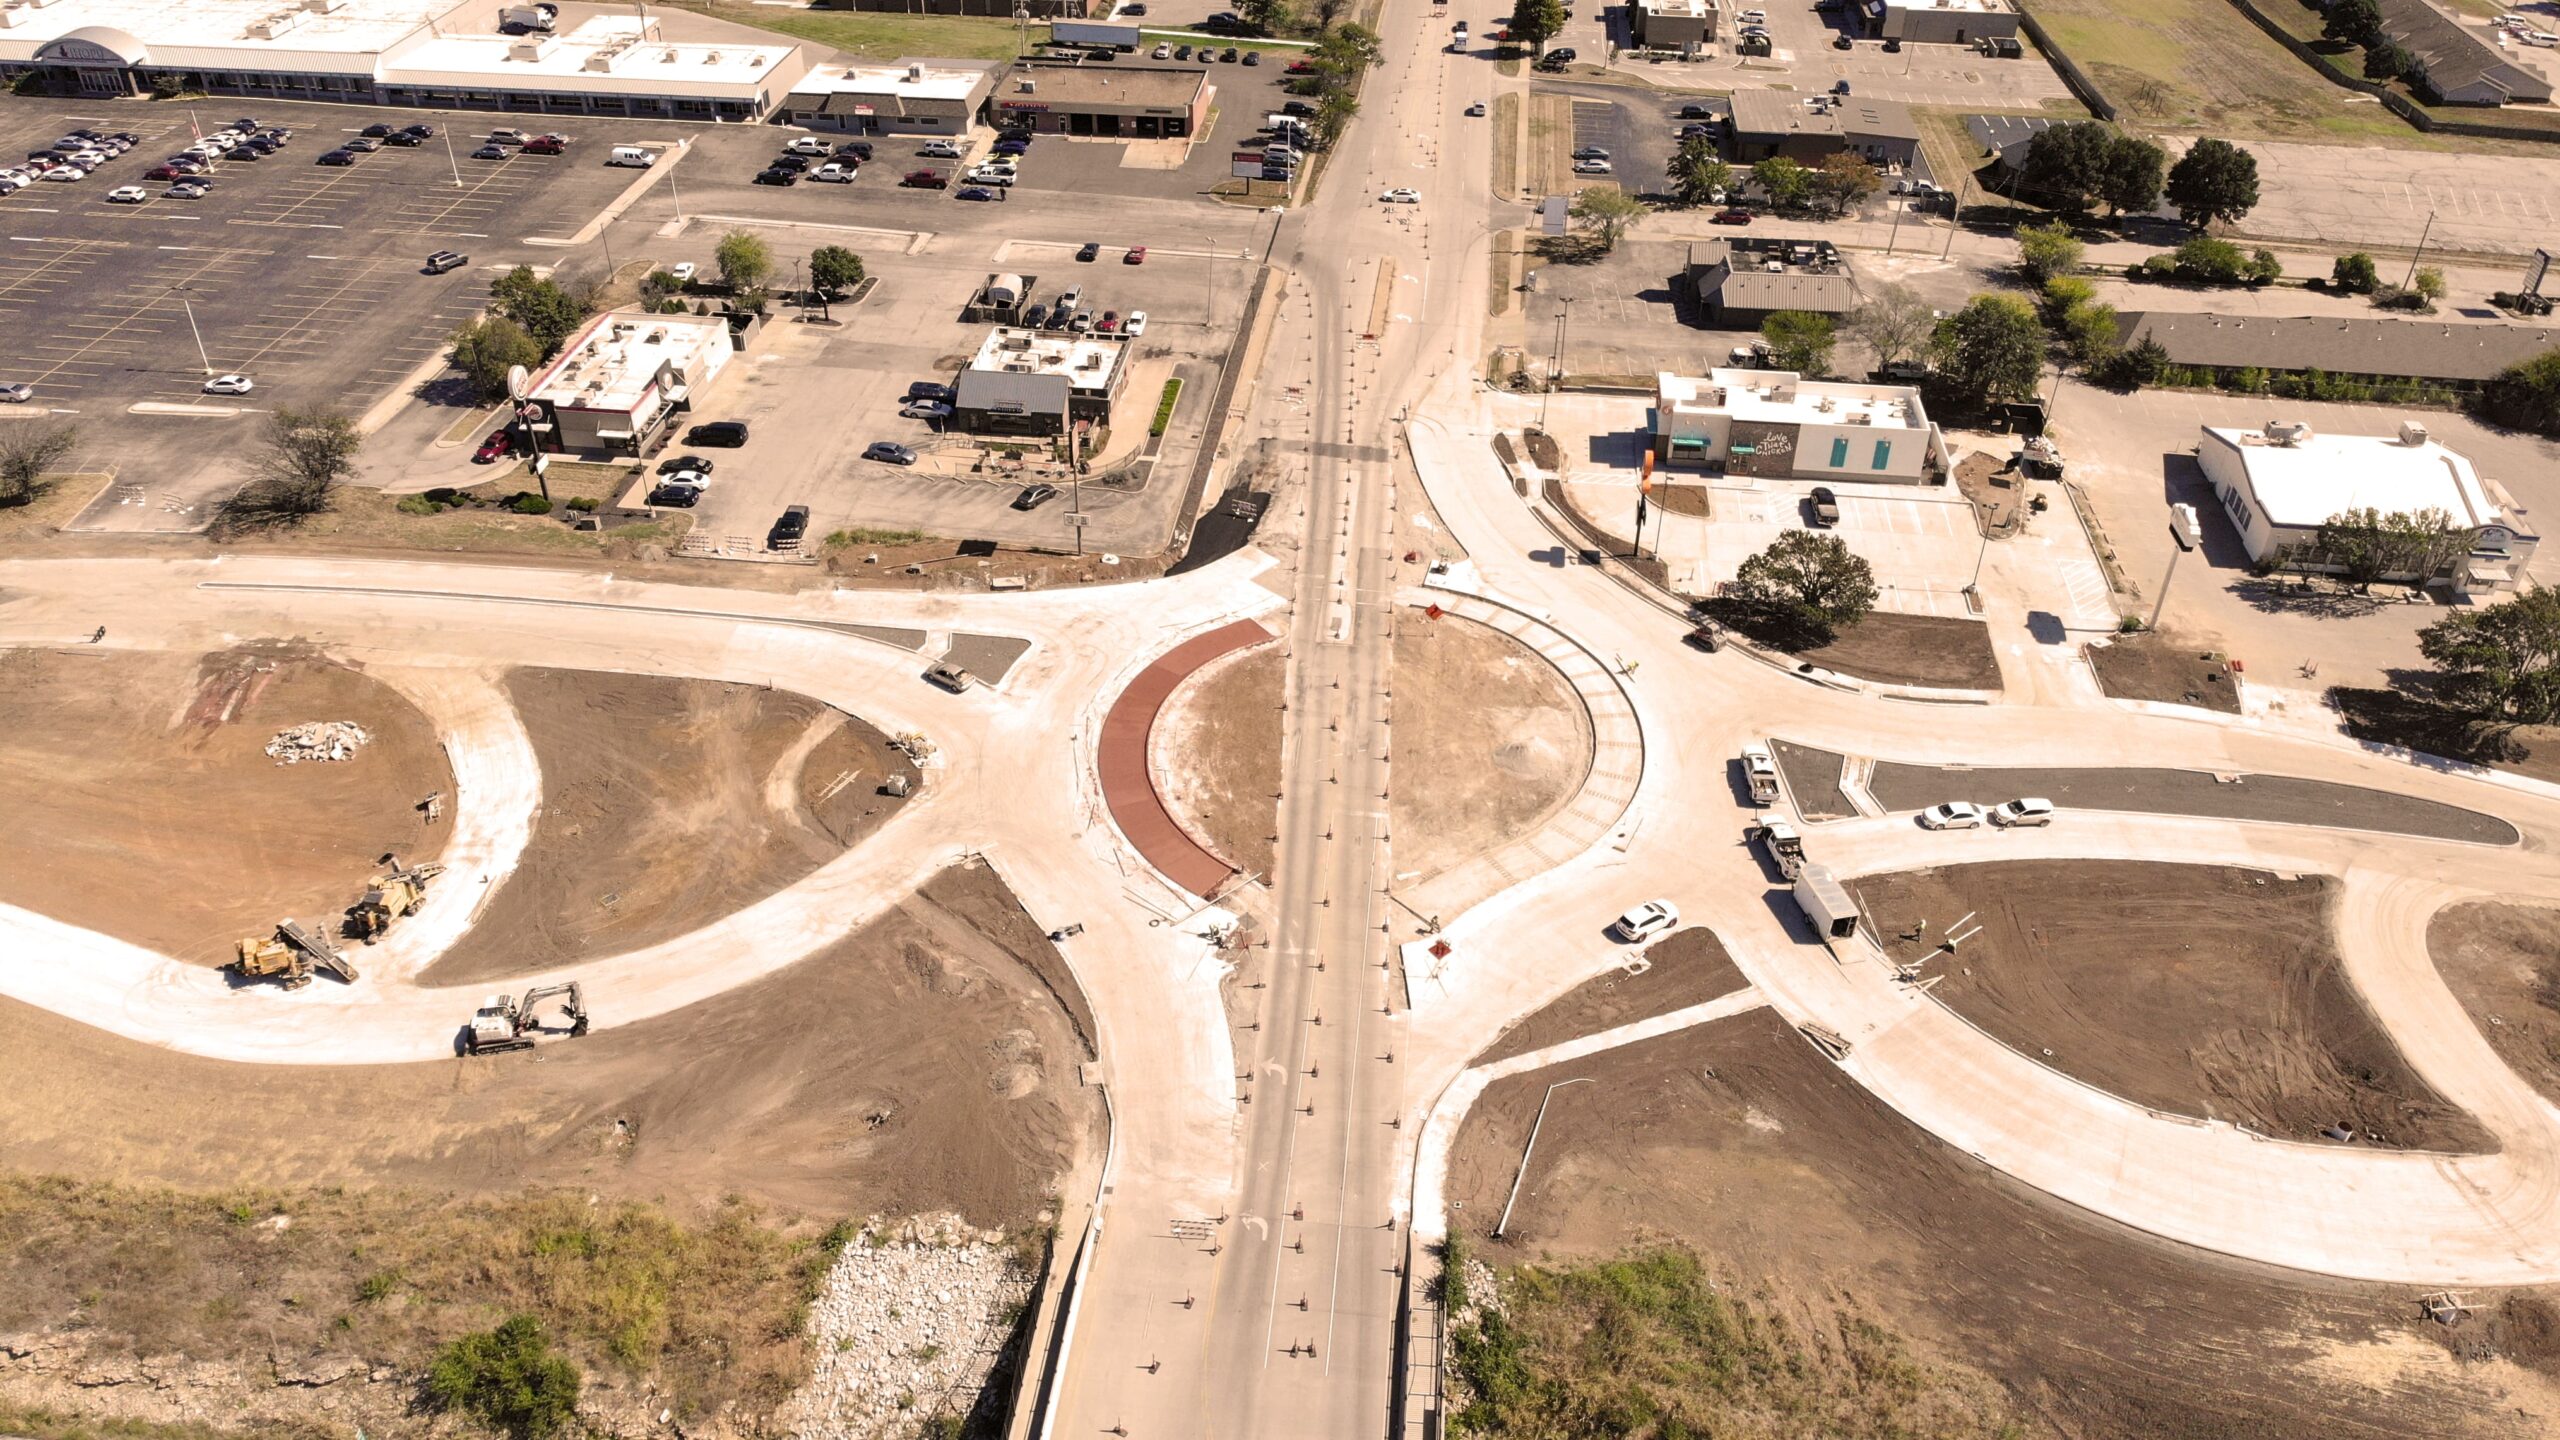 Grandview outer roads design-build project construction overview